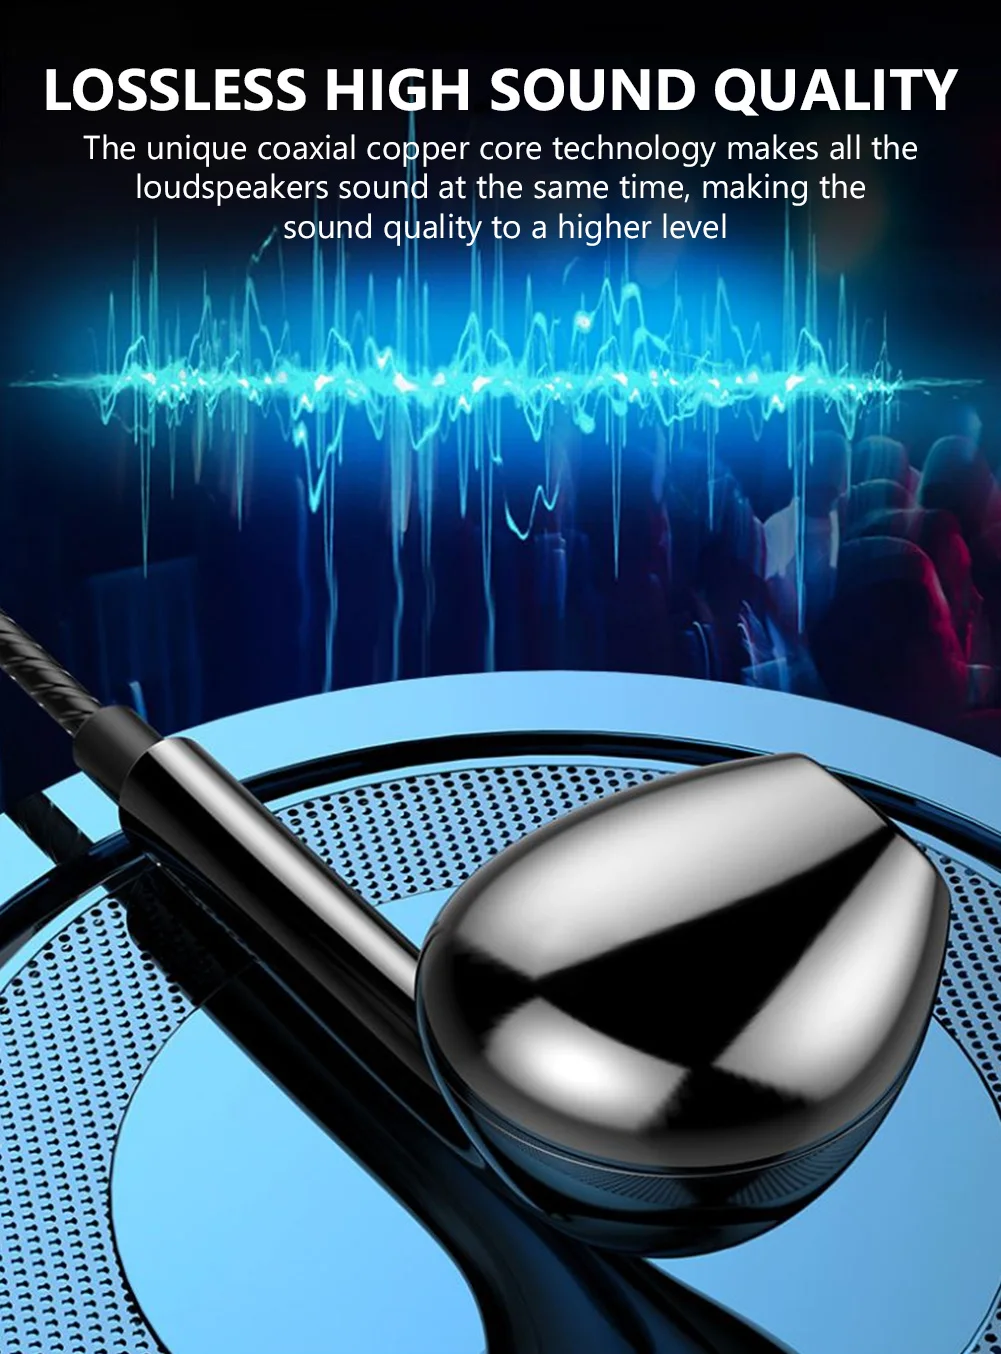 studio headphones Sport Earphone 3.5mm In-Ear Wired Headphones Bass Stereo Earbuds  Music Headsets with Mic for iPhone Samsung Xiaomi Huawei wired earbuds